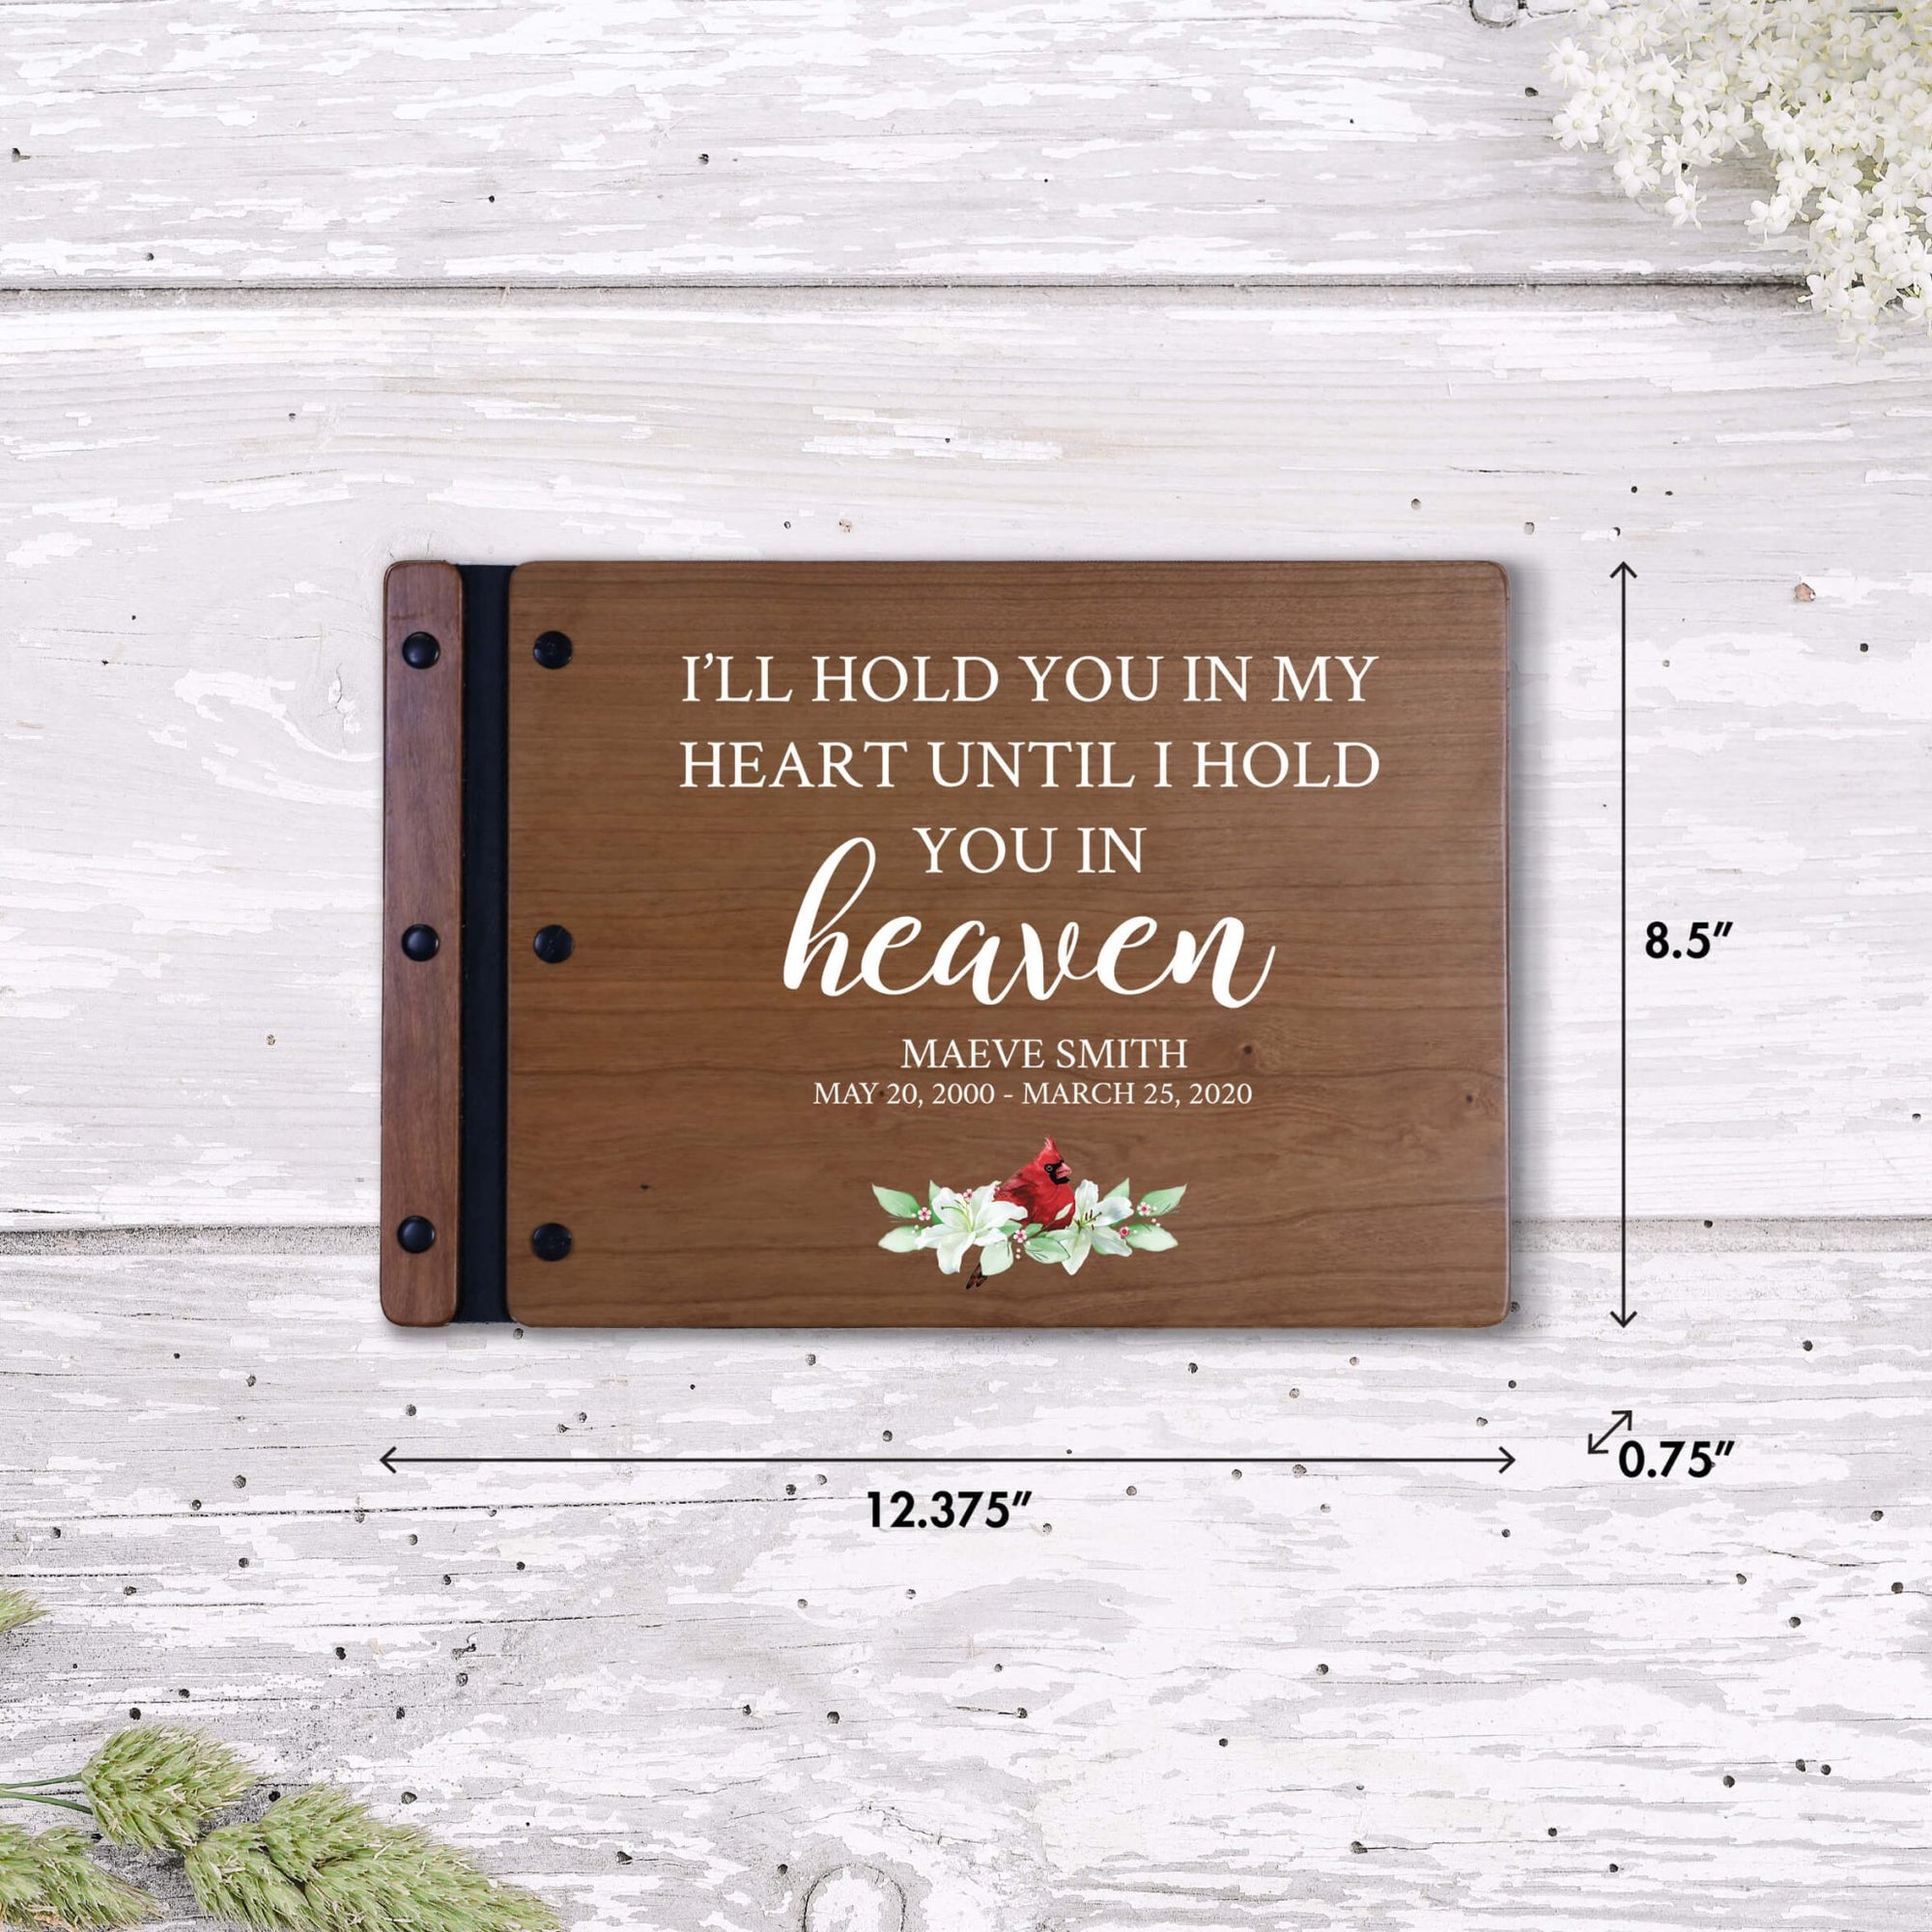 Personalized Funeral Wooden Guestbook for Memorial Service - I’ll Hold You In My Heart - LifeSong Milestones